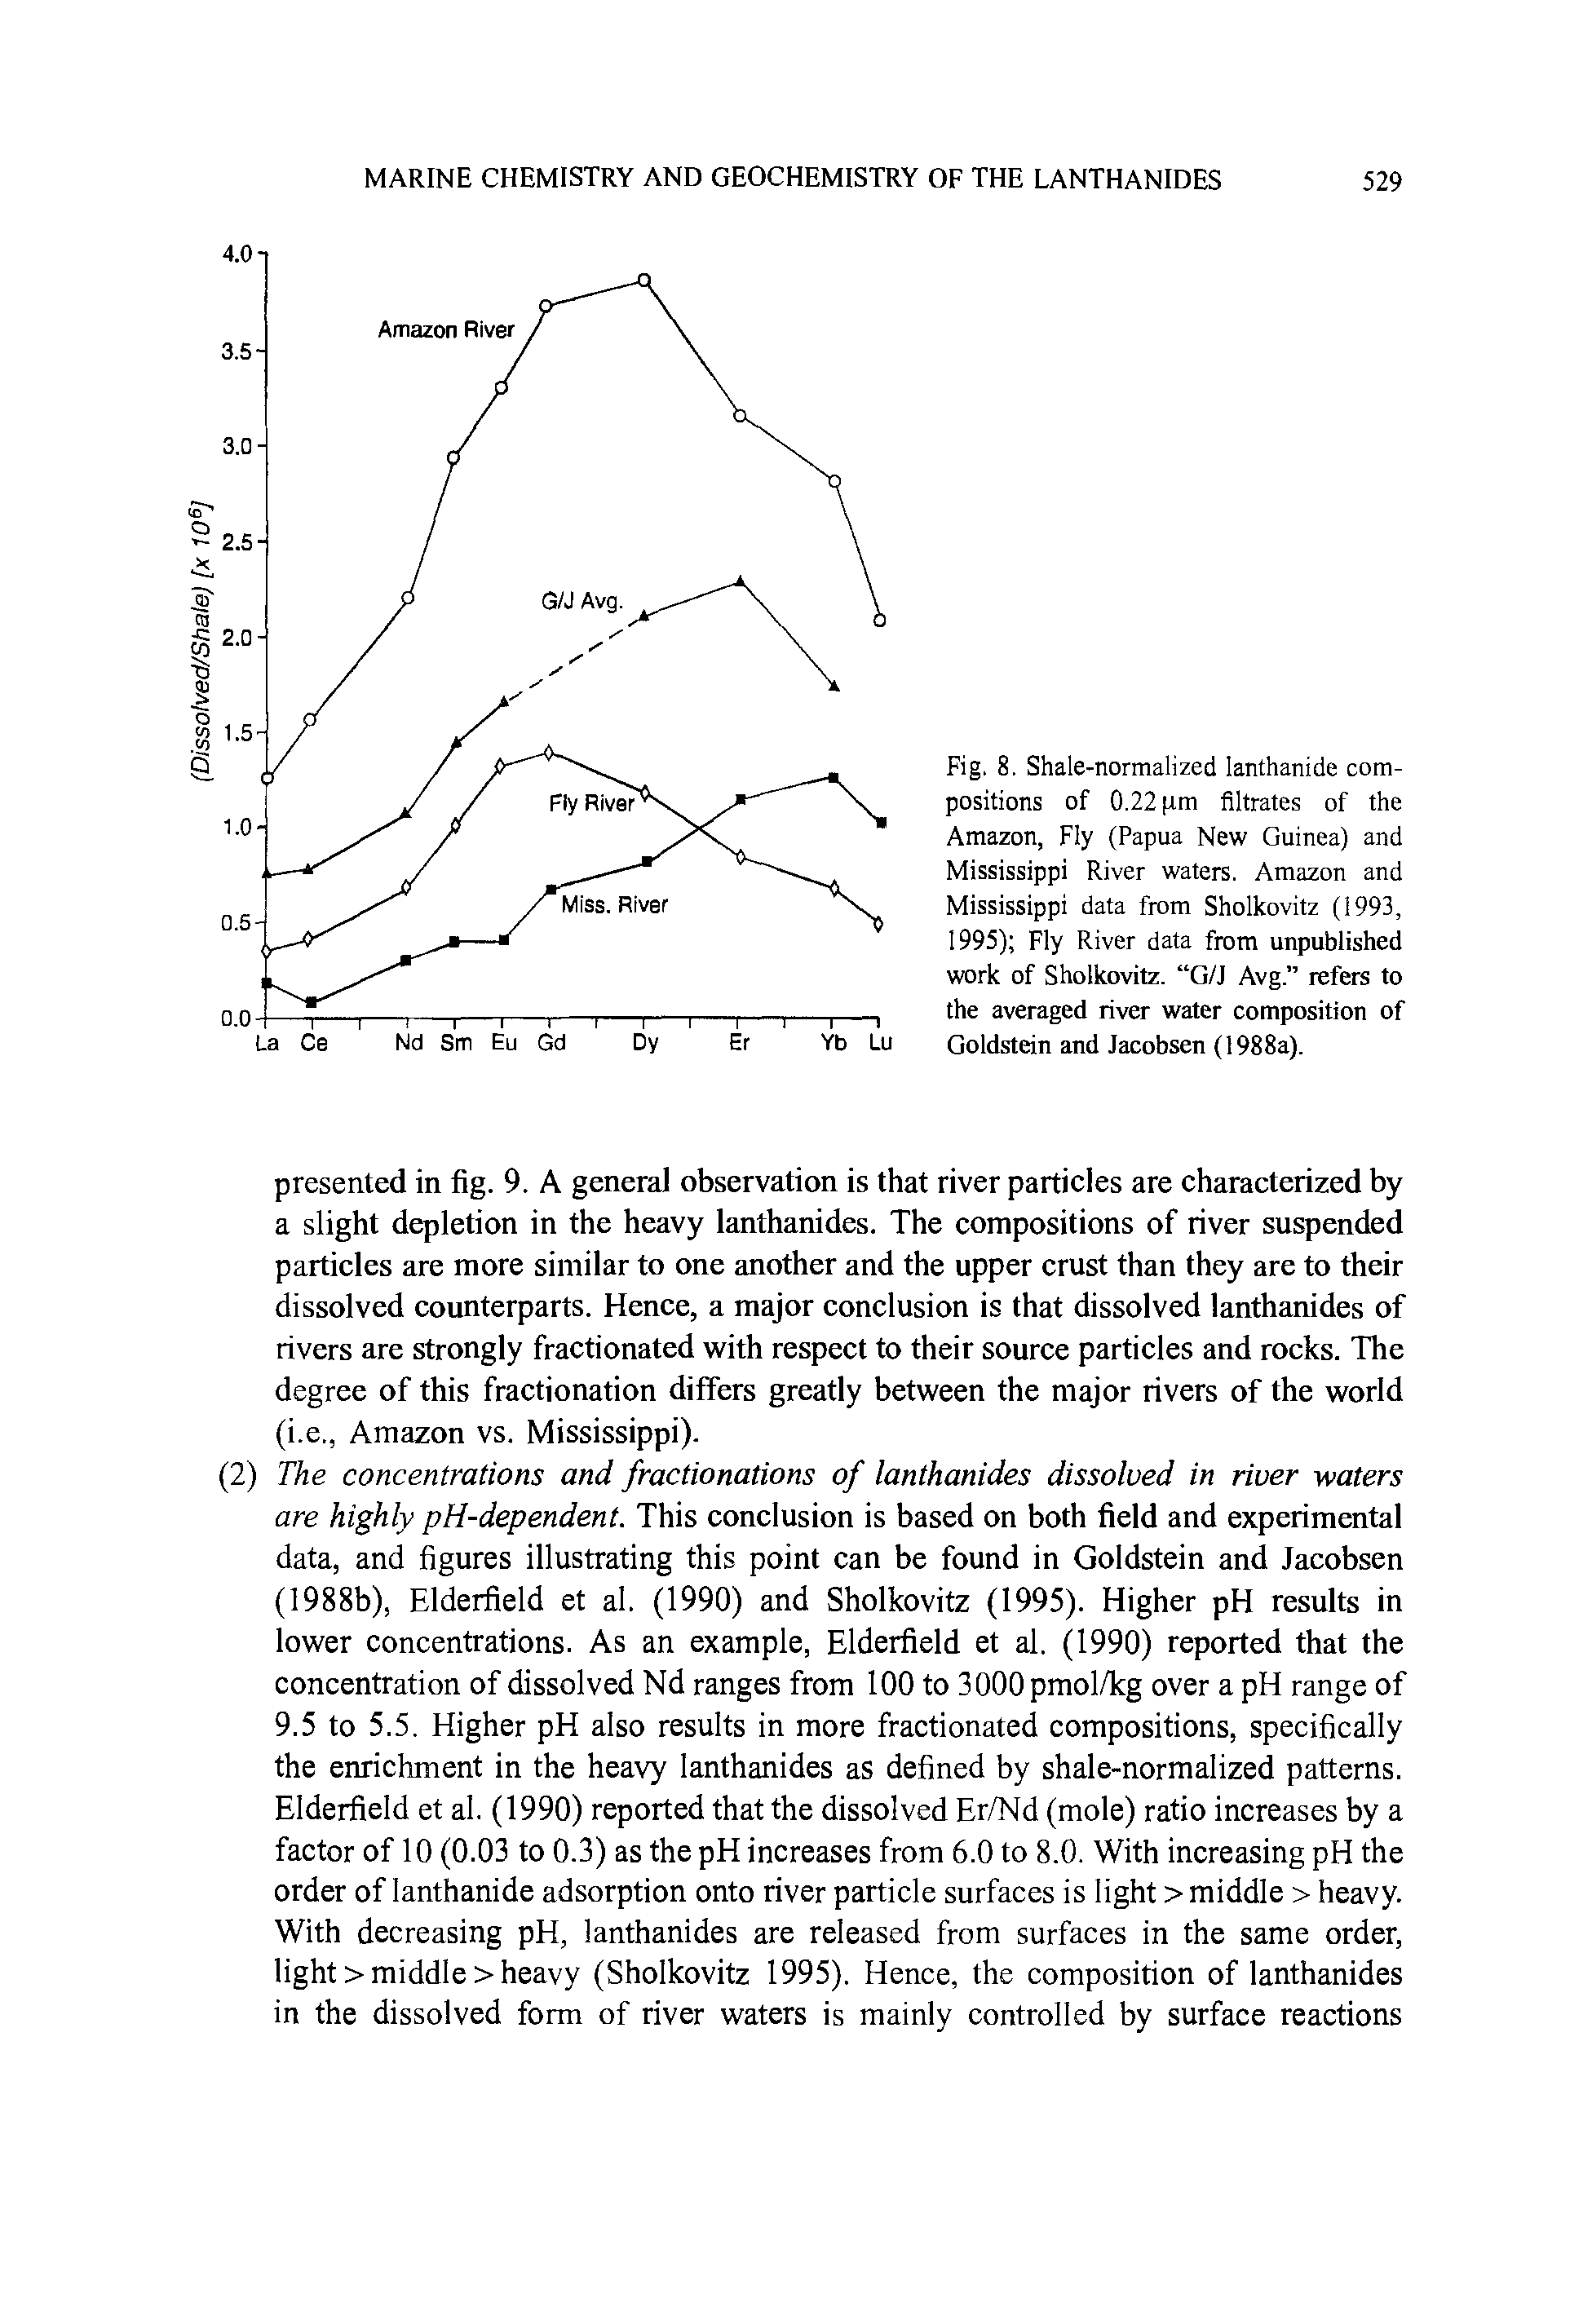 Fig. 8. Shale-normalized lanthanide compositions of 0.22 (tm filtrates of the Amazon, Fly (Papua New Guinea) and Mississippi River waters. Amazon and Mississippi data from Sholkovitz (1993, 1995) Fly River data from unpublished work of Sholkovitz. G/J Avg. refers to the averaged river water composition of Goldstein and Jacobsen (1988a).